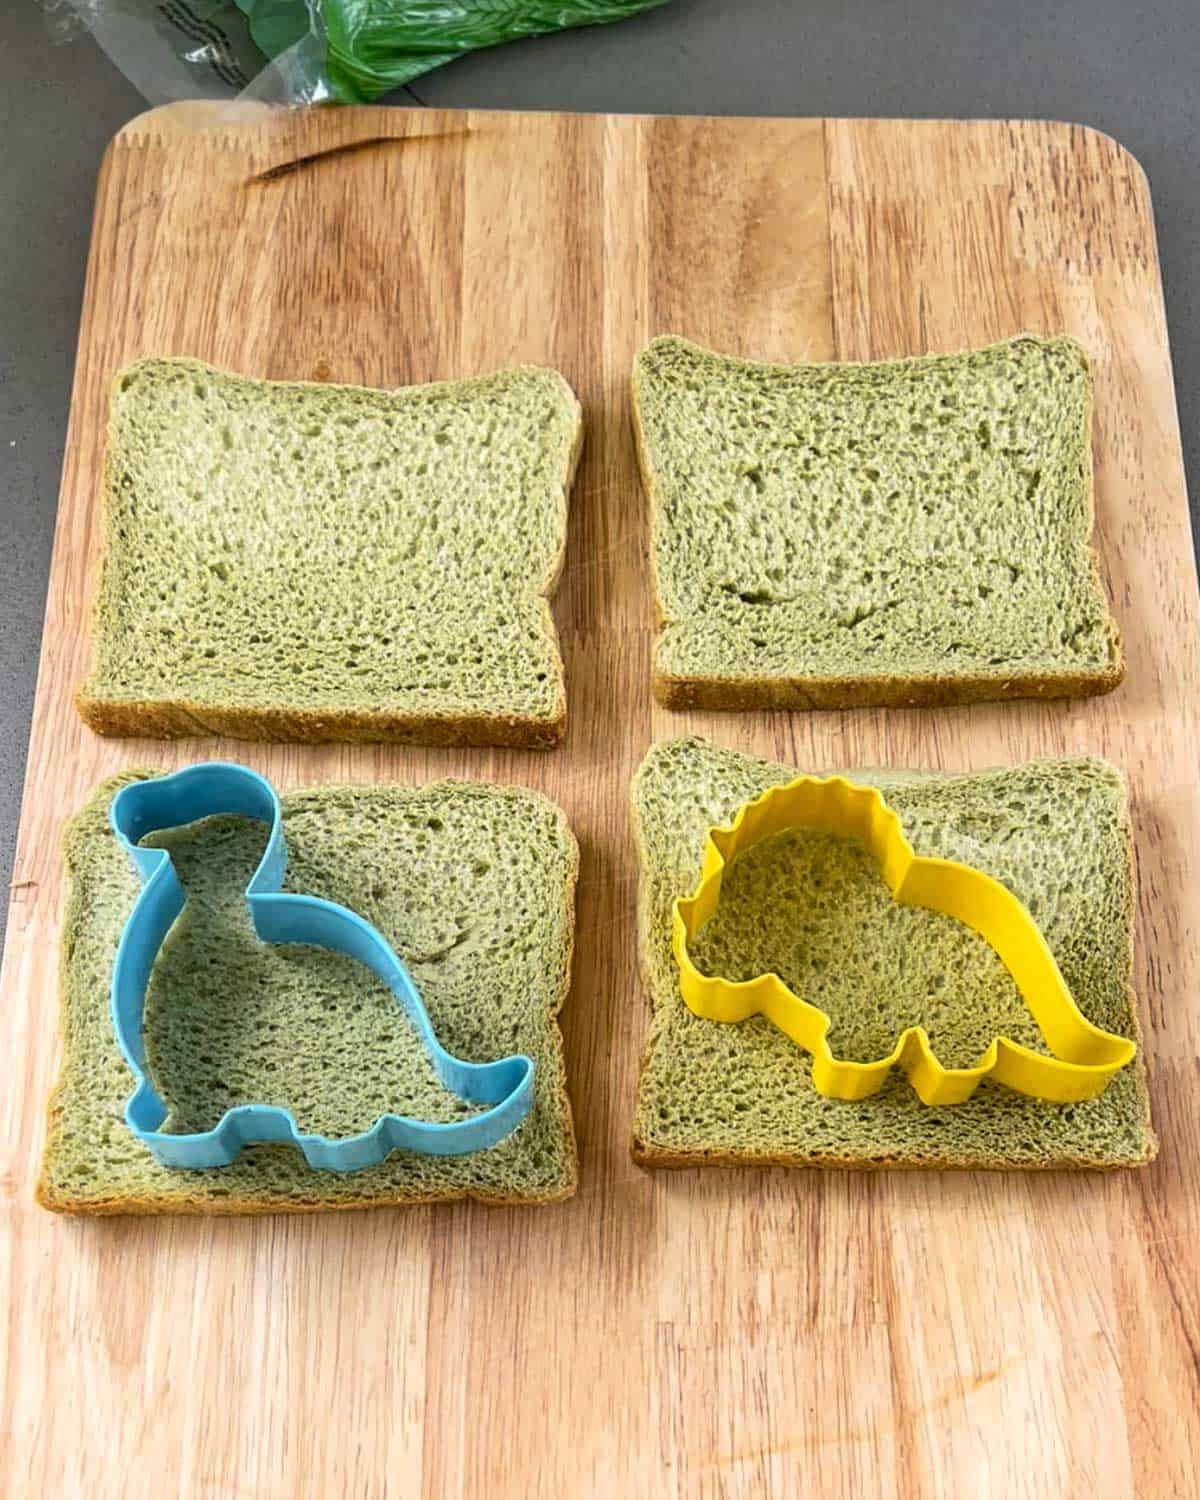 Dinosaur cookie cutters on pieces of spinach bread on a wooden chopping board.